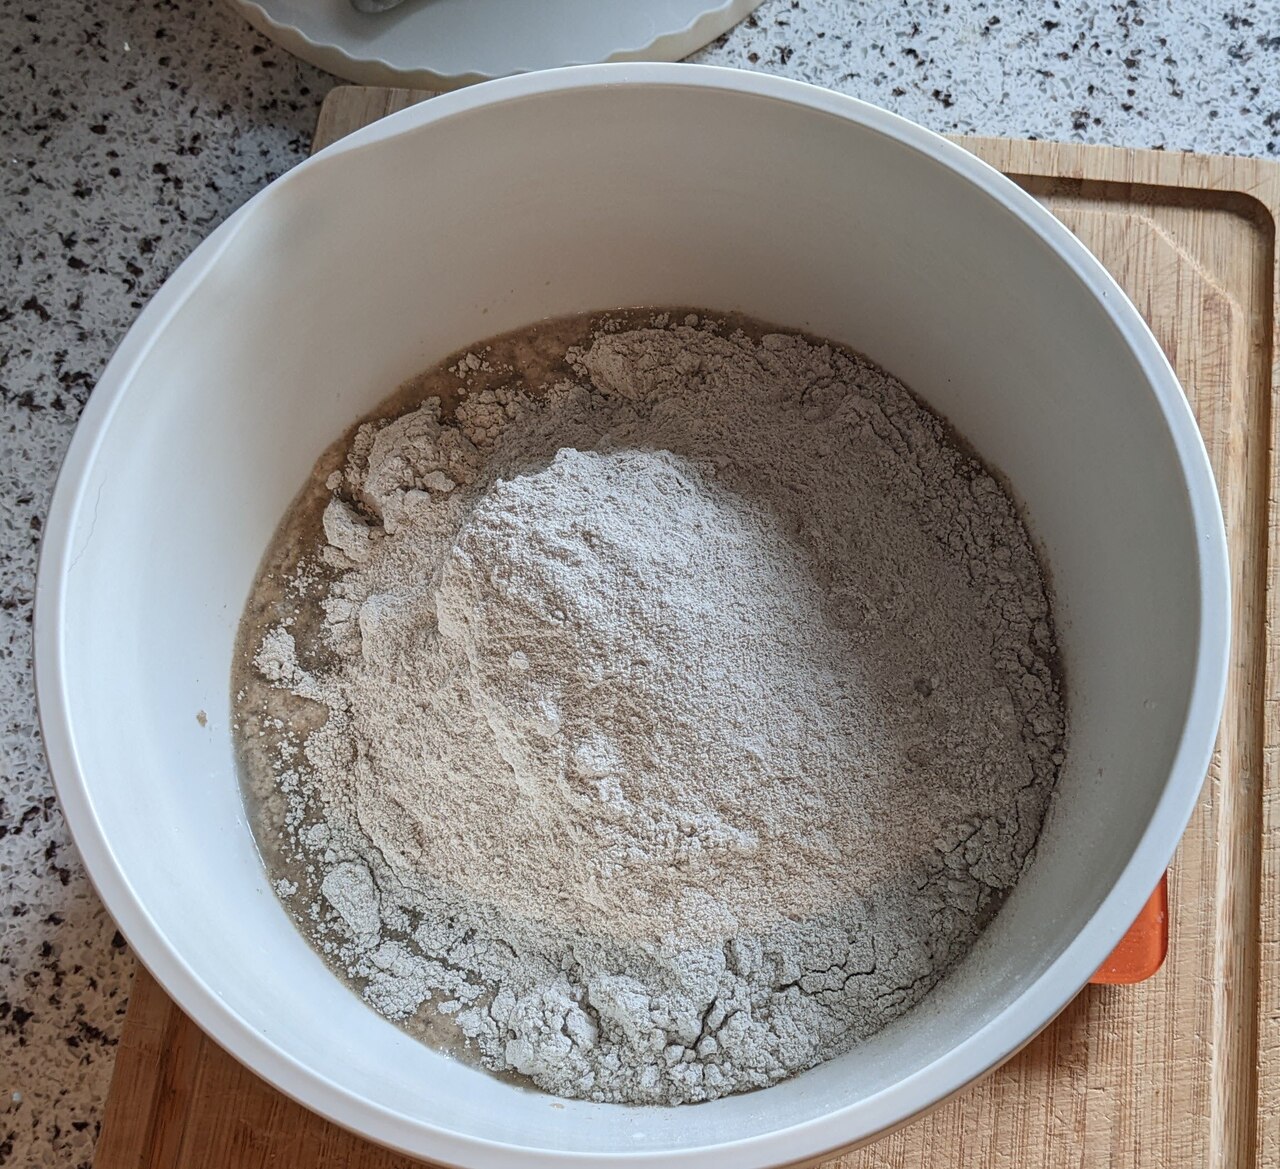 Add rye flour, then mix very well